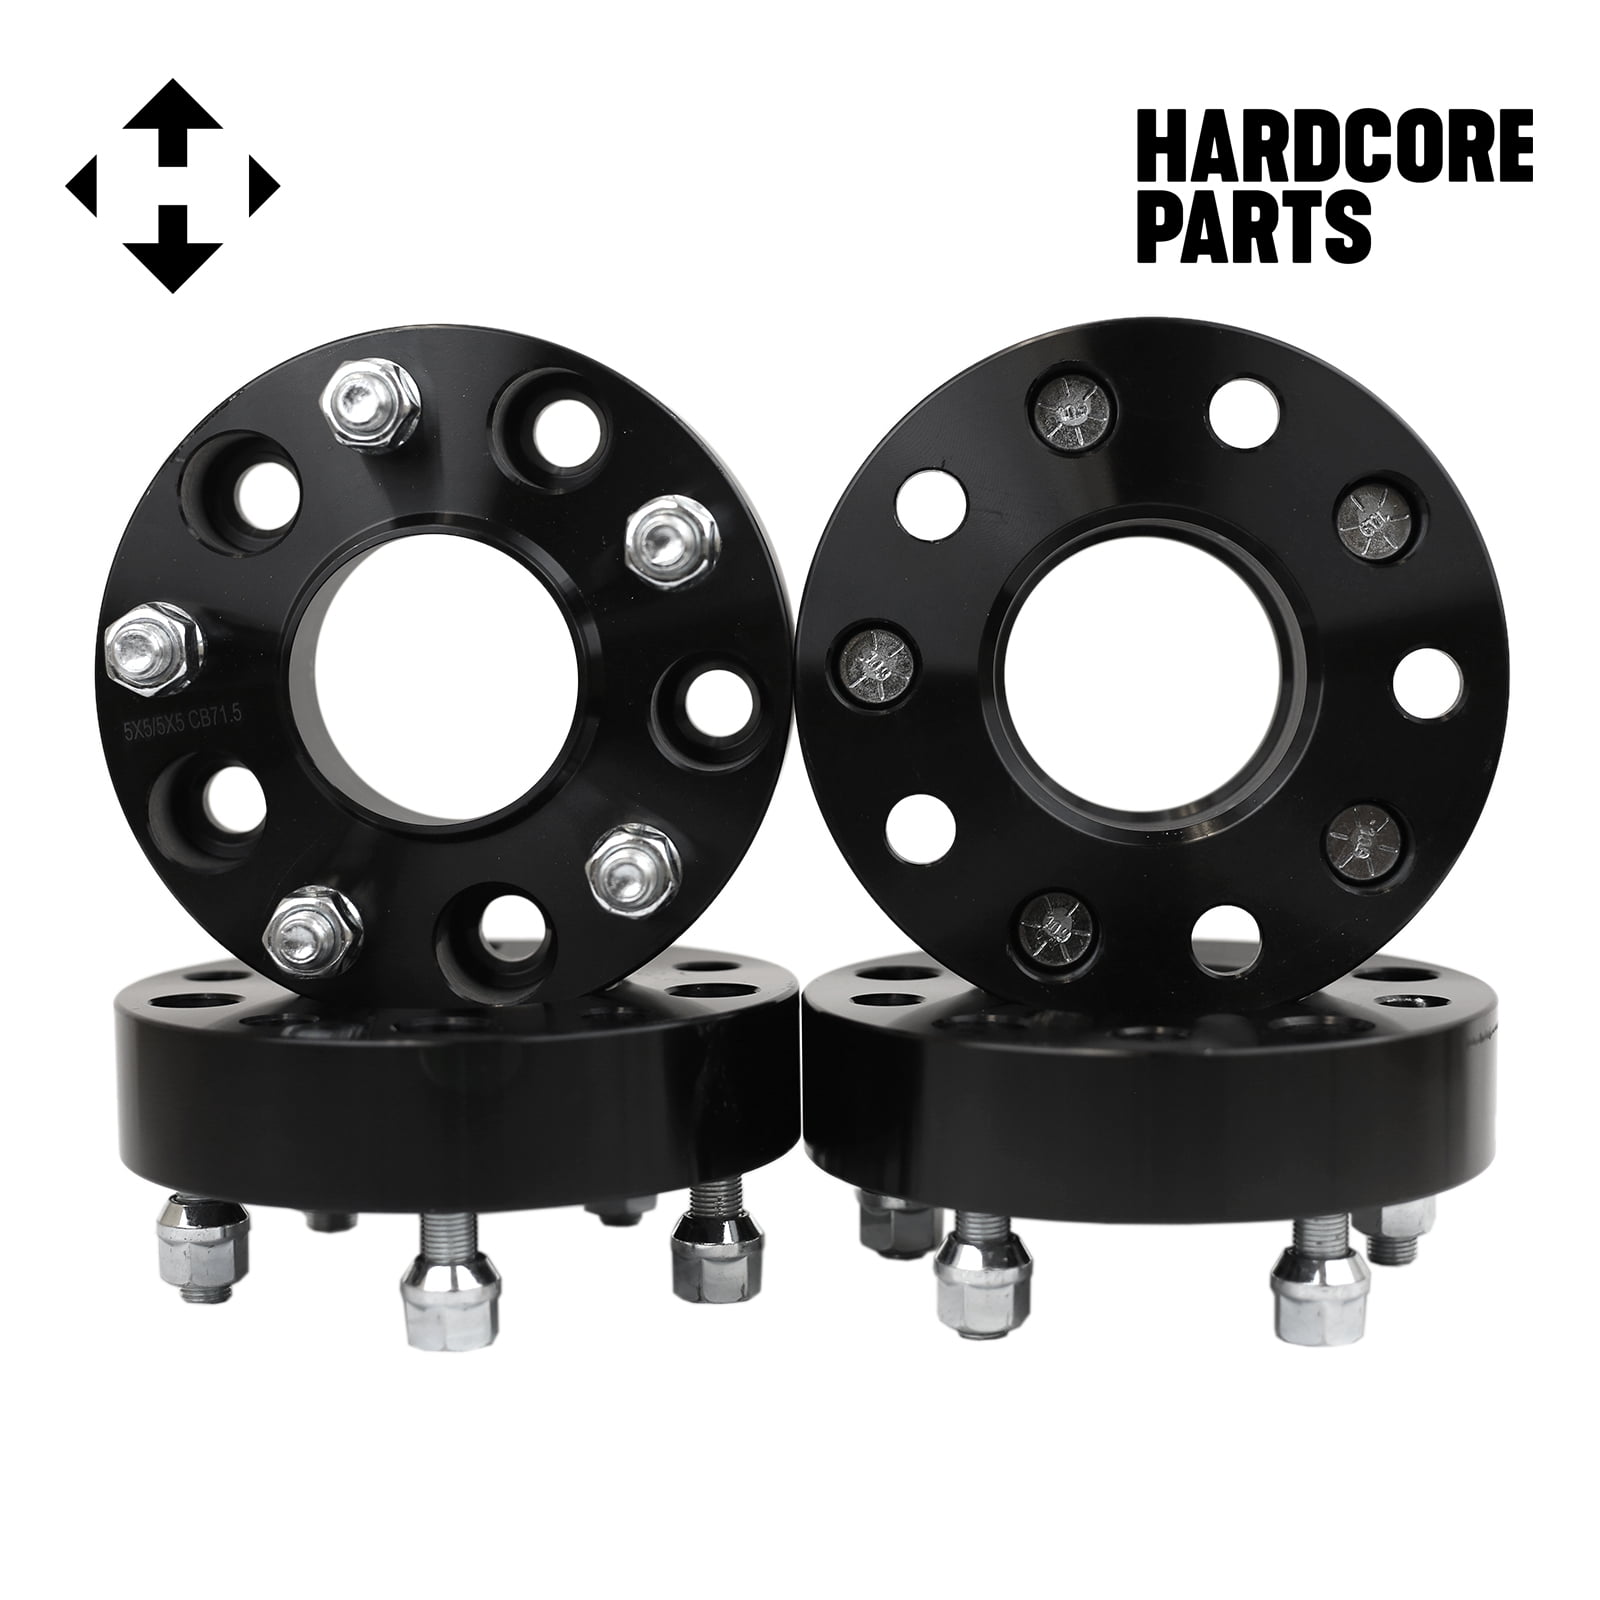 2 X 7MM ALLOY WHEELS SPACERS SHIMS FIT ROVER 400 